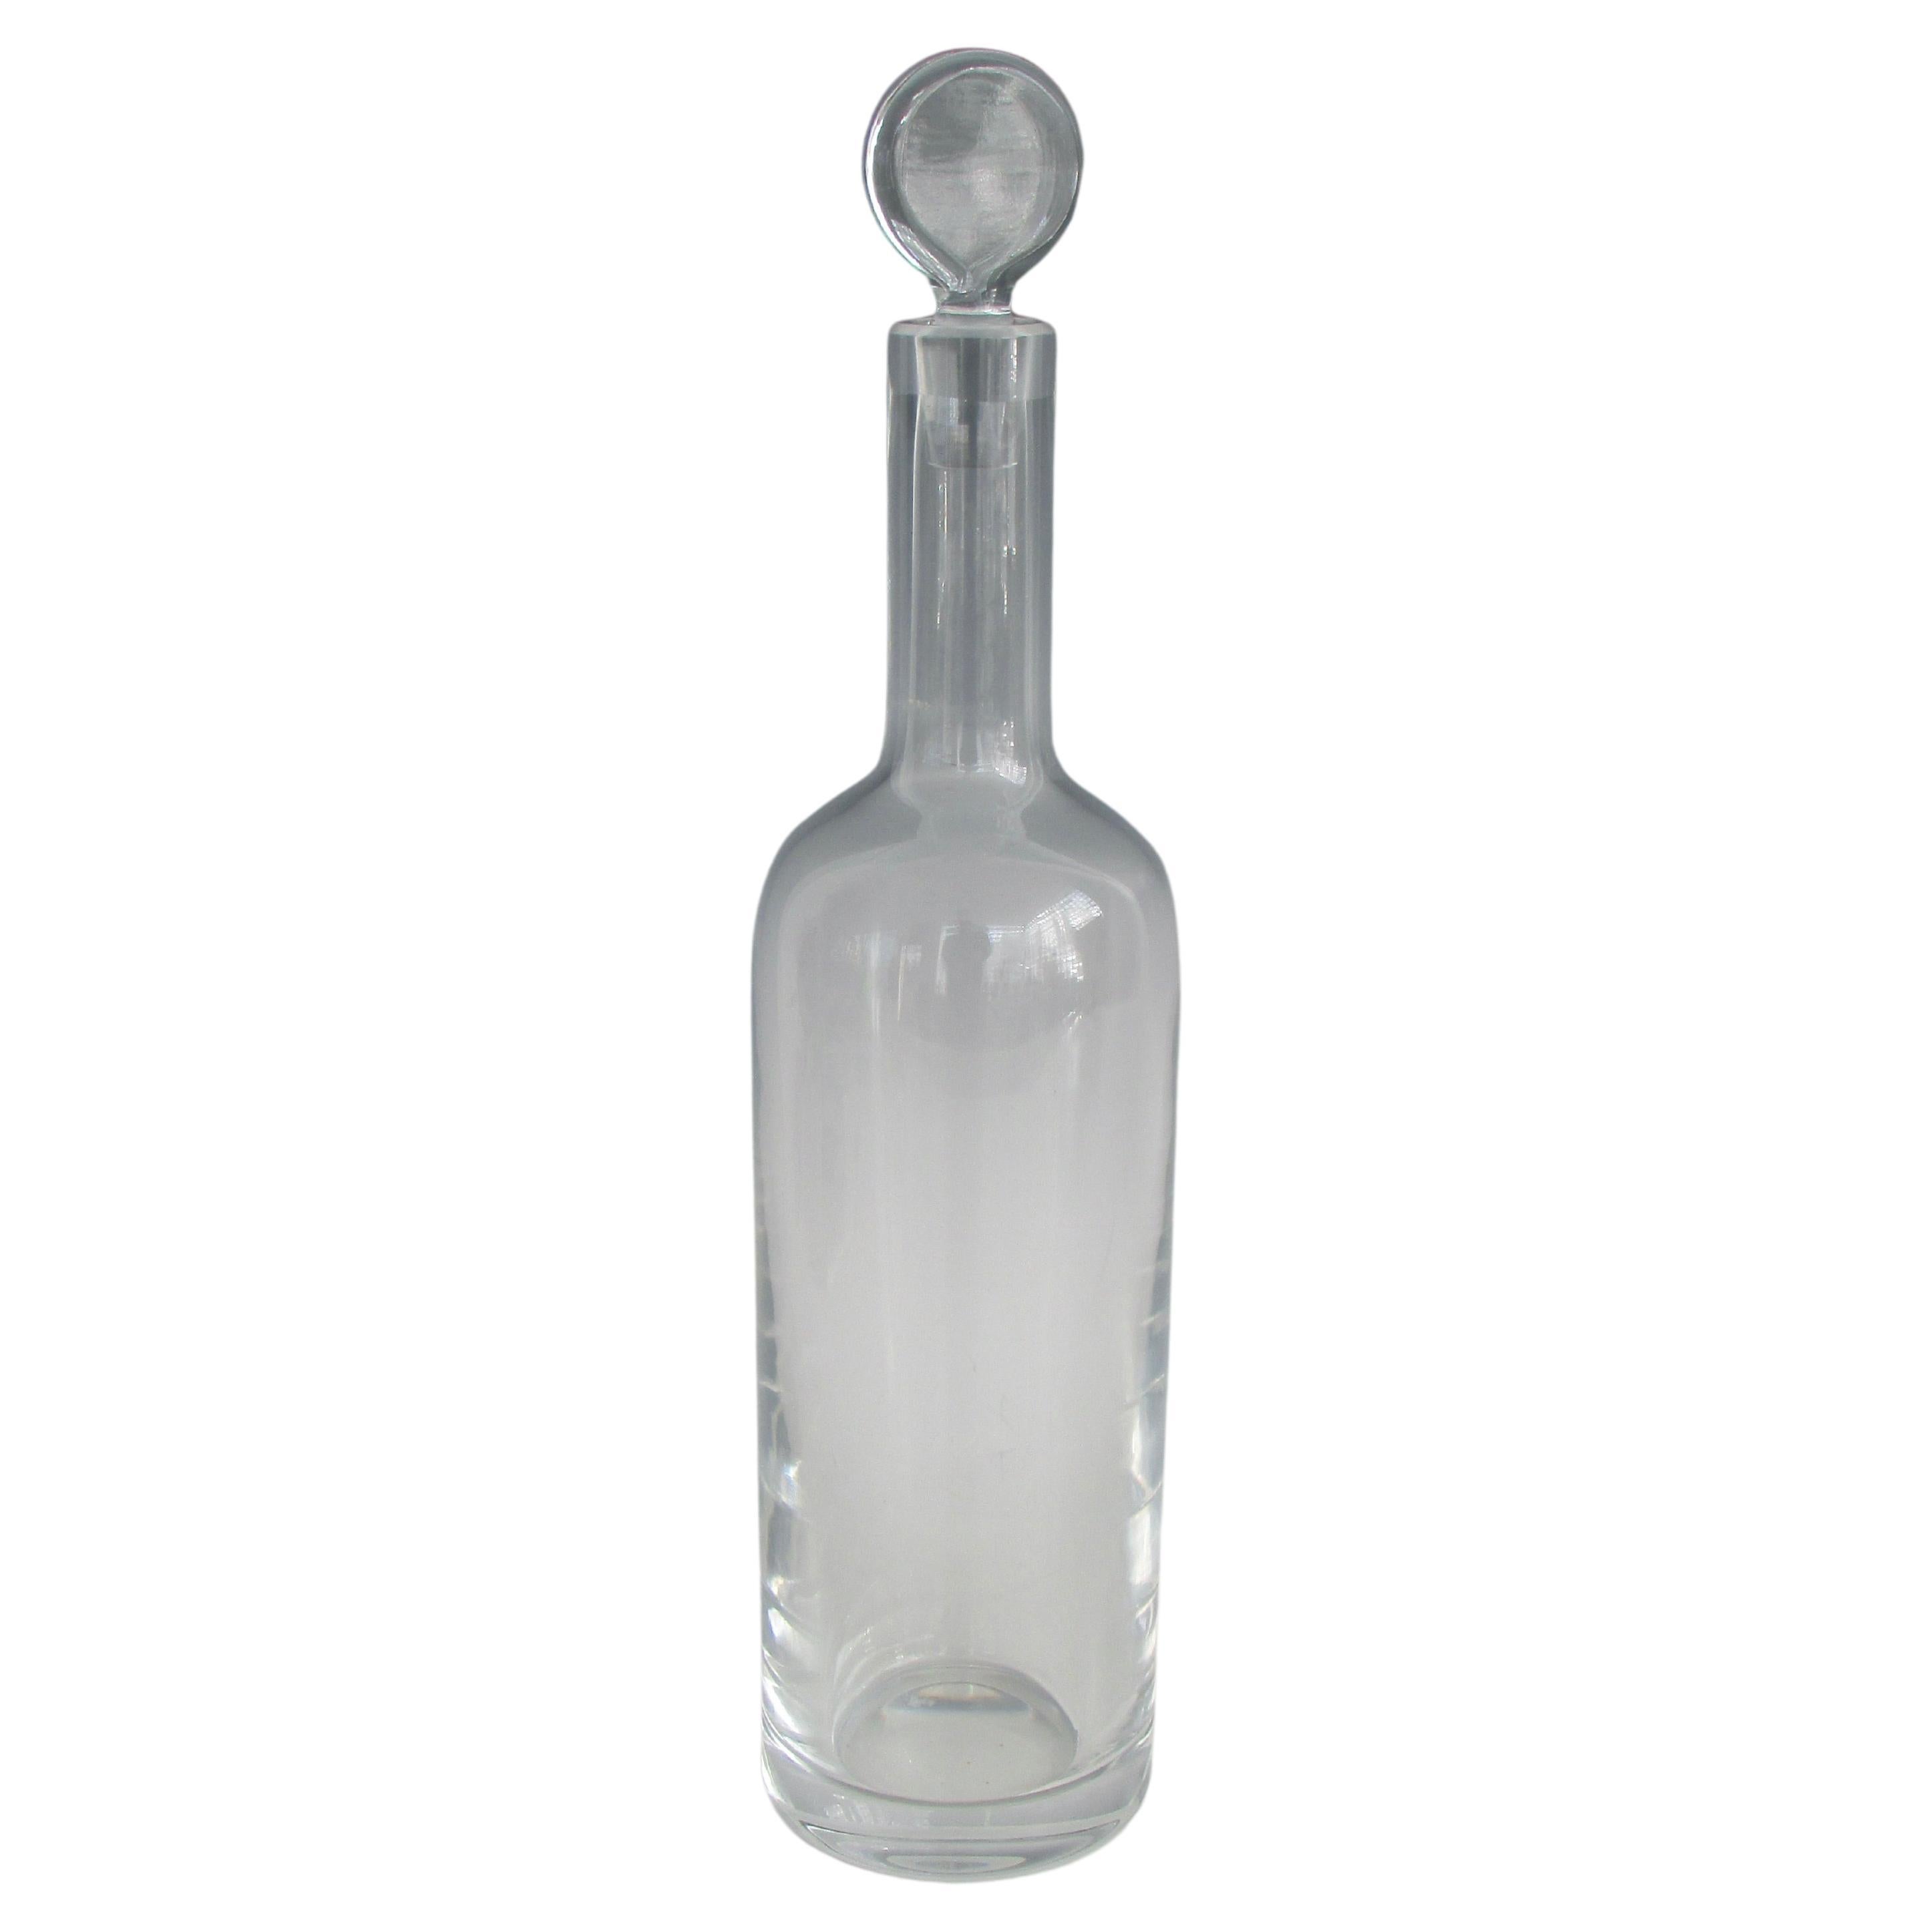 Baccarat France  Clear Lead Crystal Bottle Decanter with Stopper